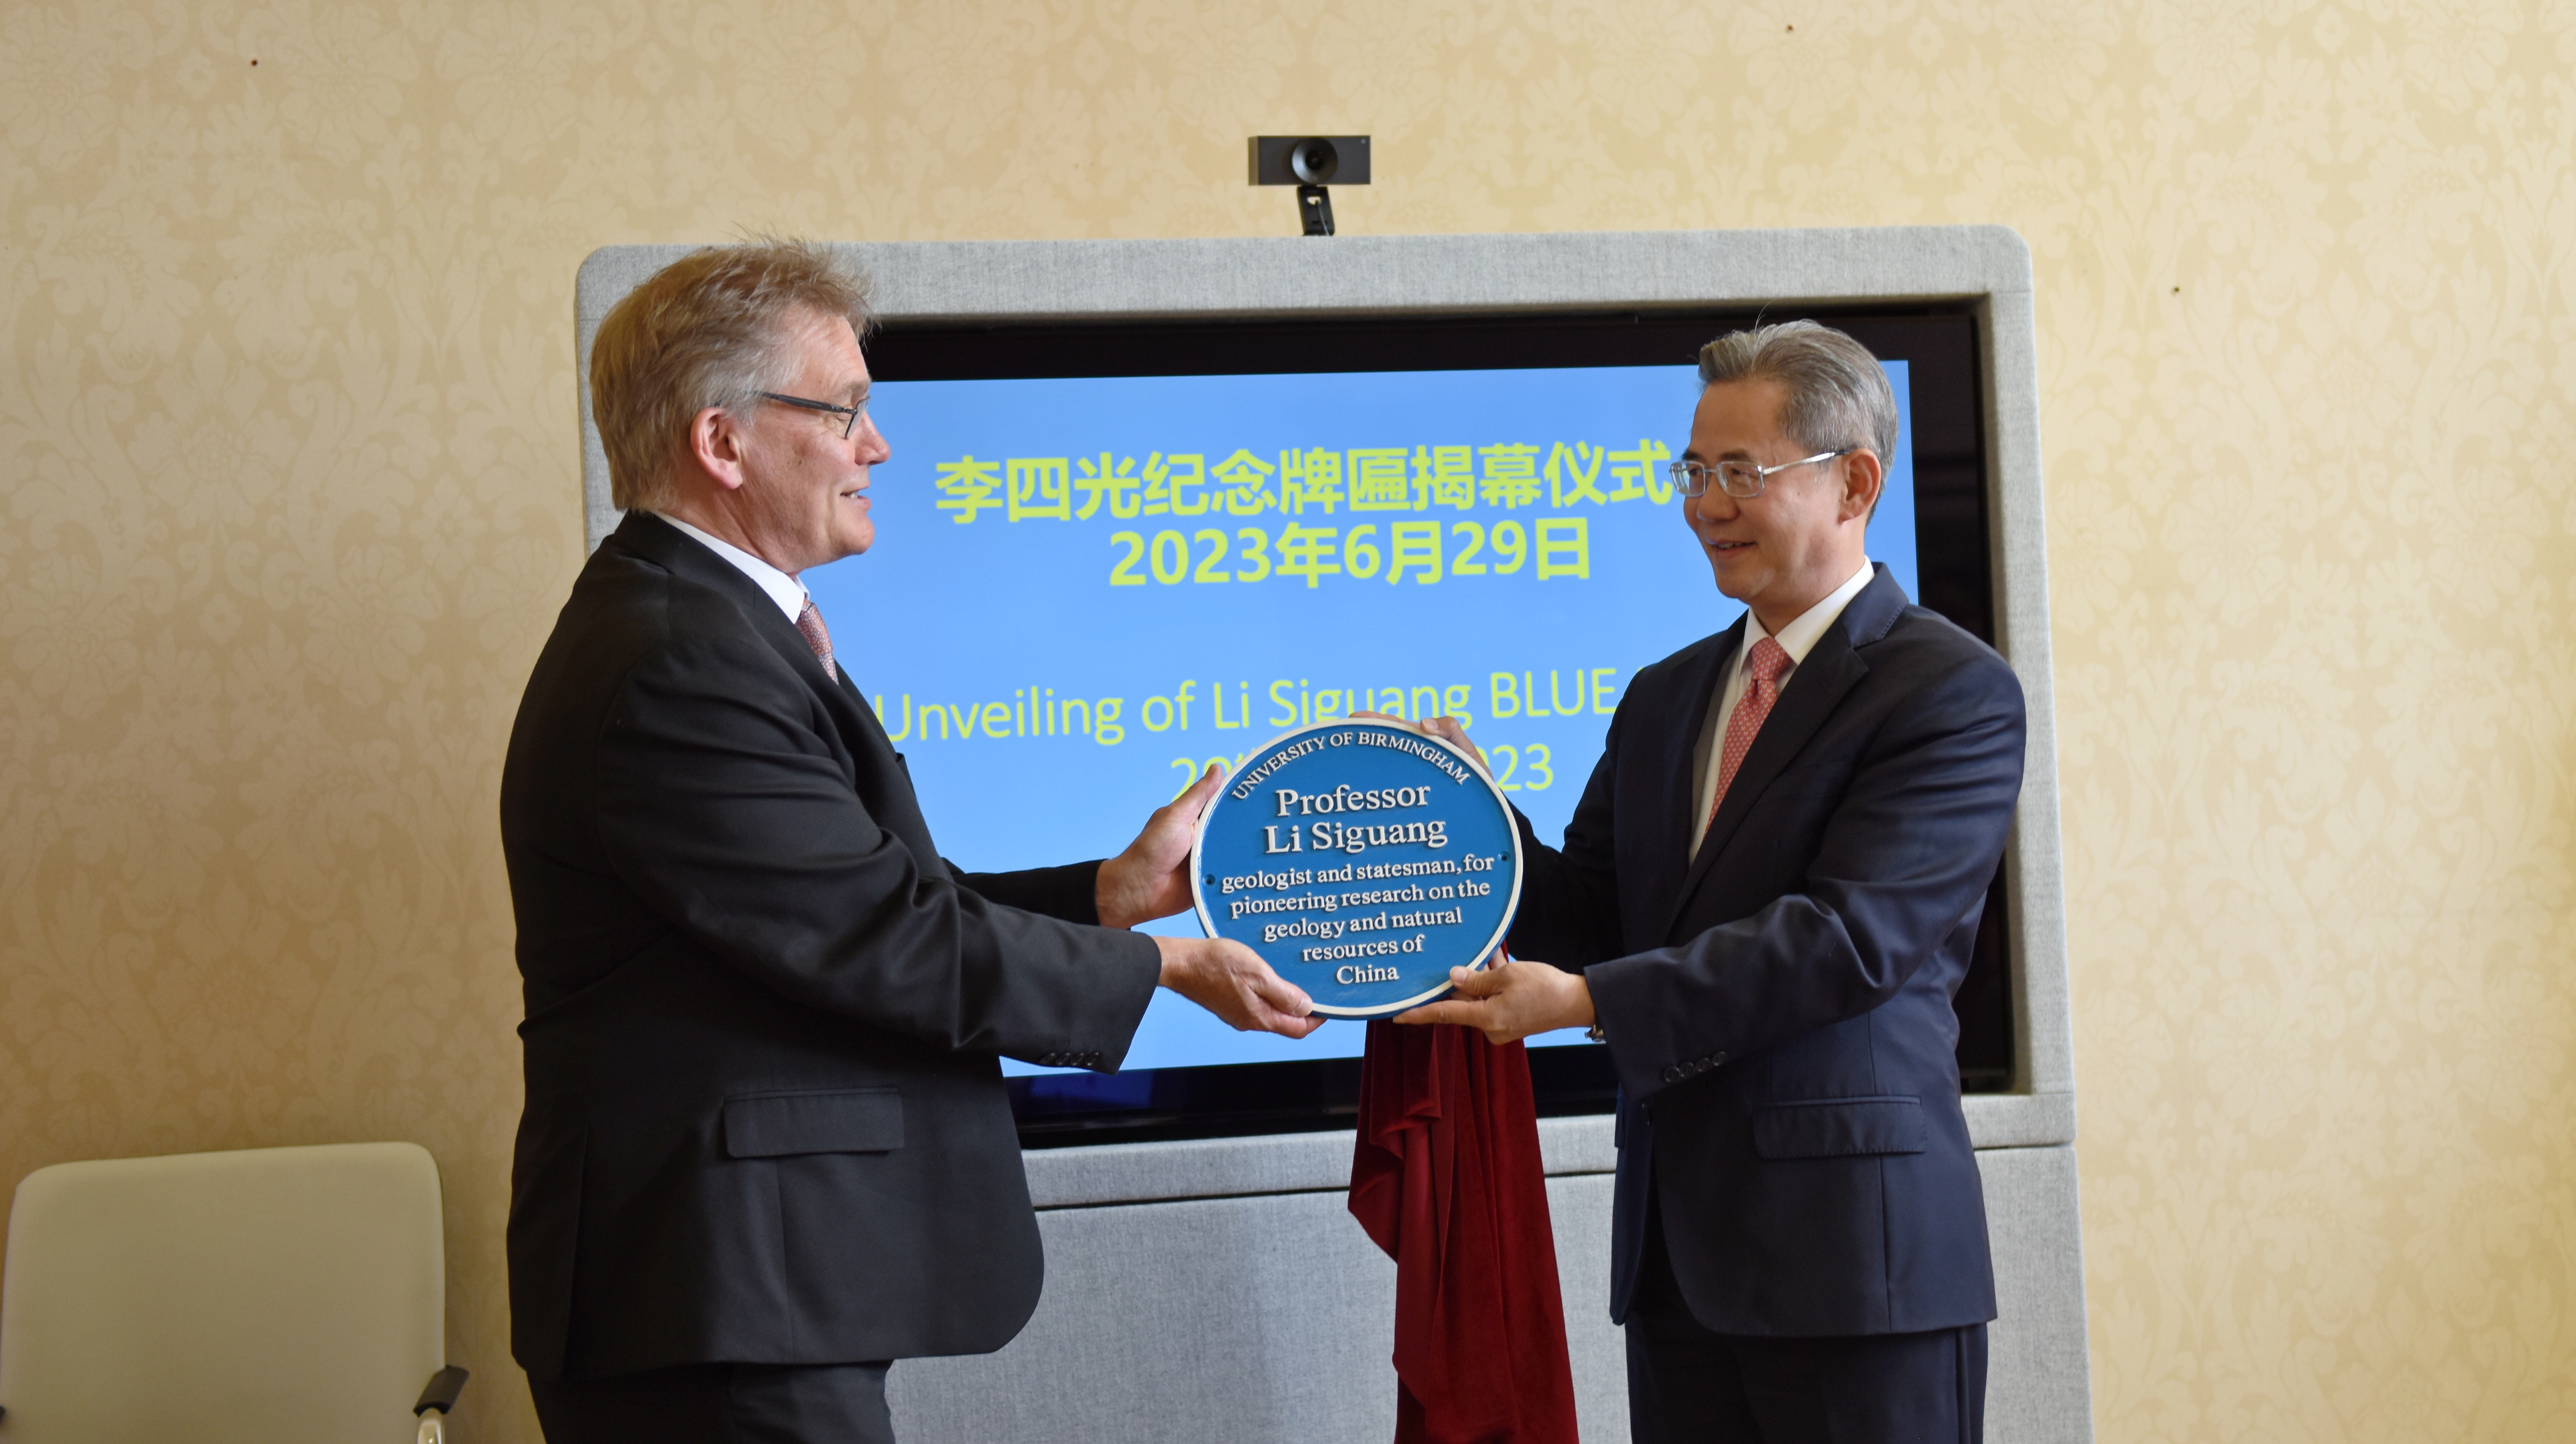 Blue plaque unveiled for the University's Chinese alumni Li Siguang to mark his pioneering research on the geology. /CGTN Photo